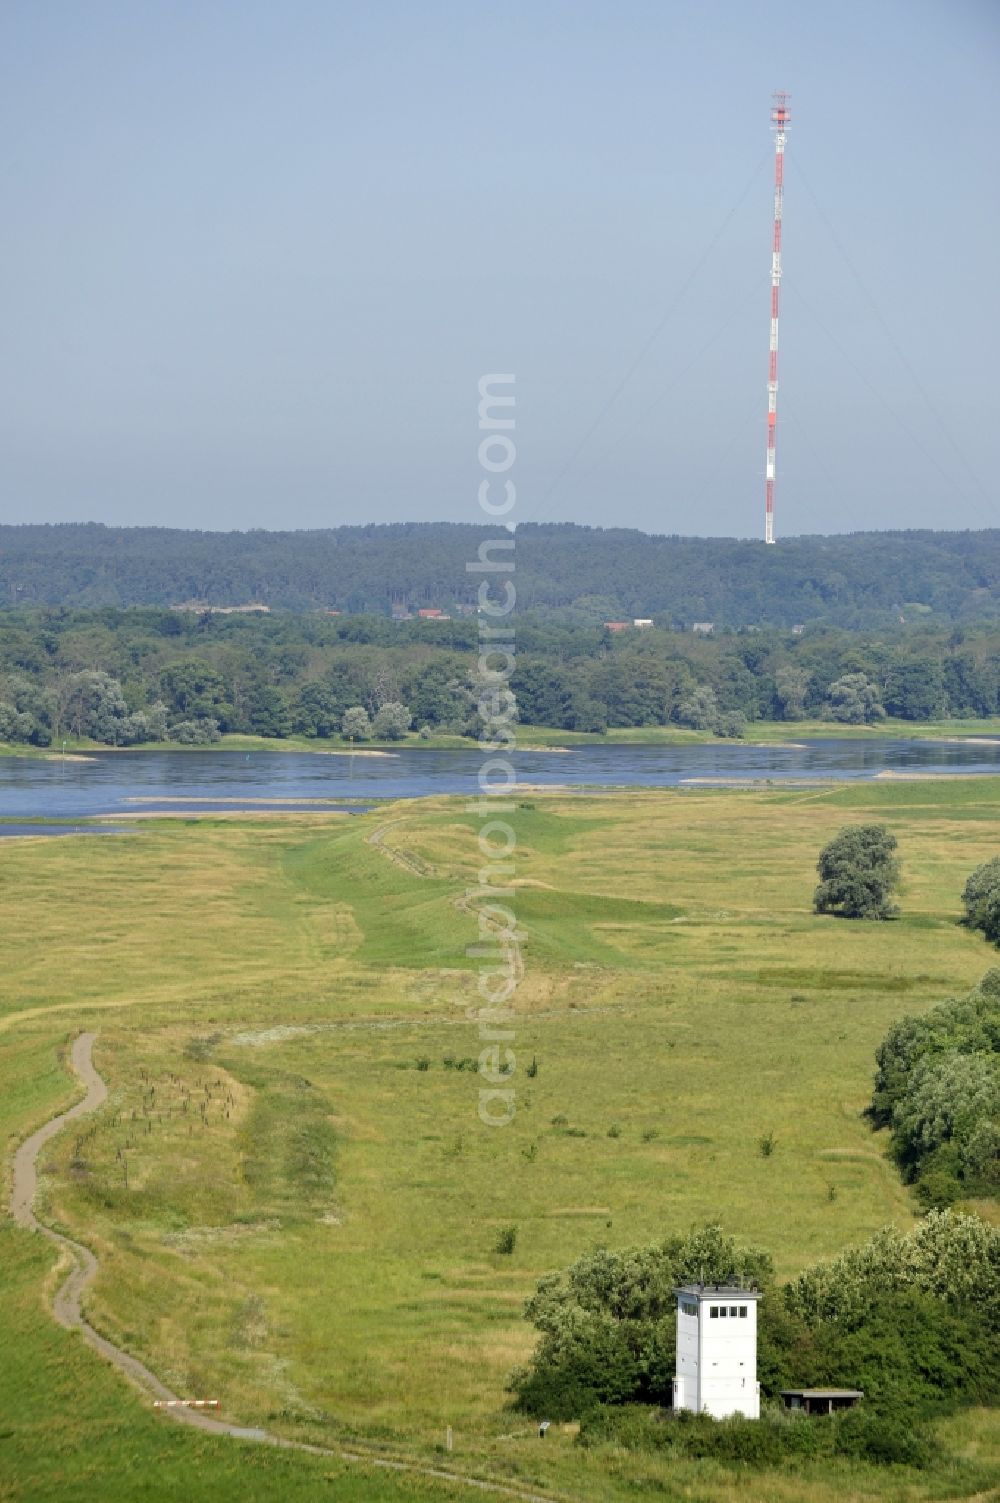 Aerial photograph Wustrow - 08/07/2012 Wustrow View the former border Tower on dike in the nature reserve at Wustrow in Brandenburg. The monument of the former border between East and West Germany is now a monument of contemporary history of divided Germany in the postwar history of Europe